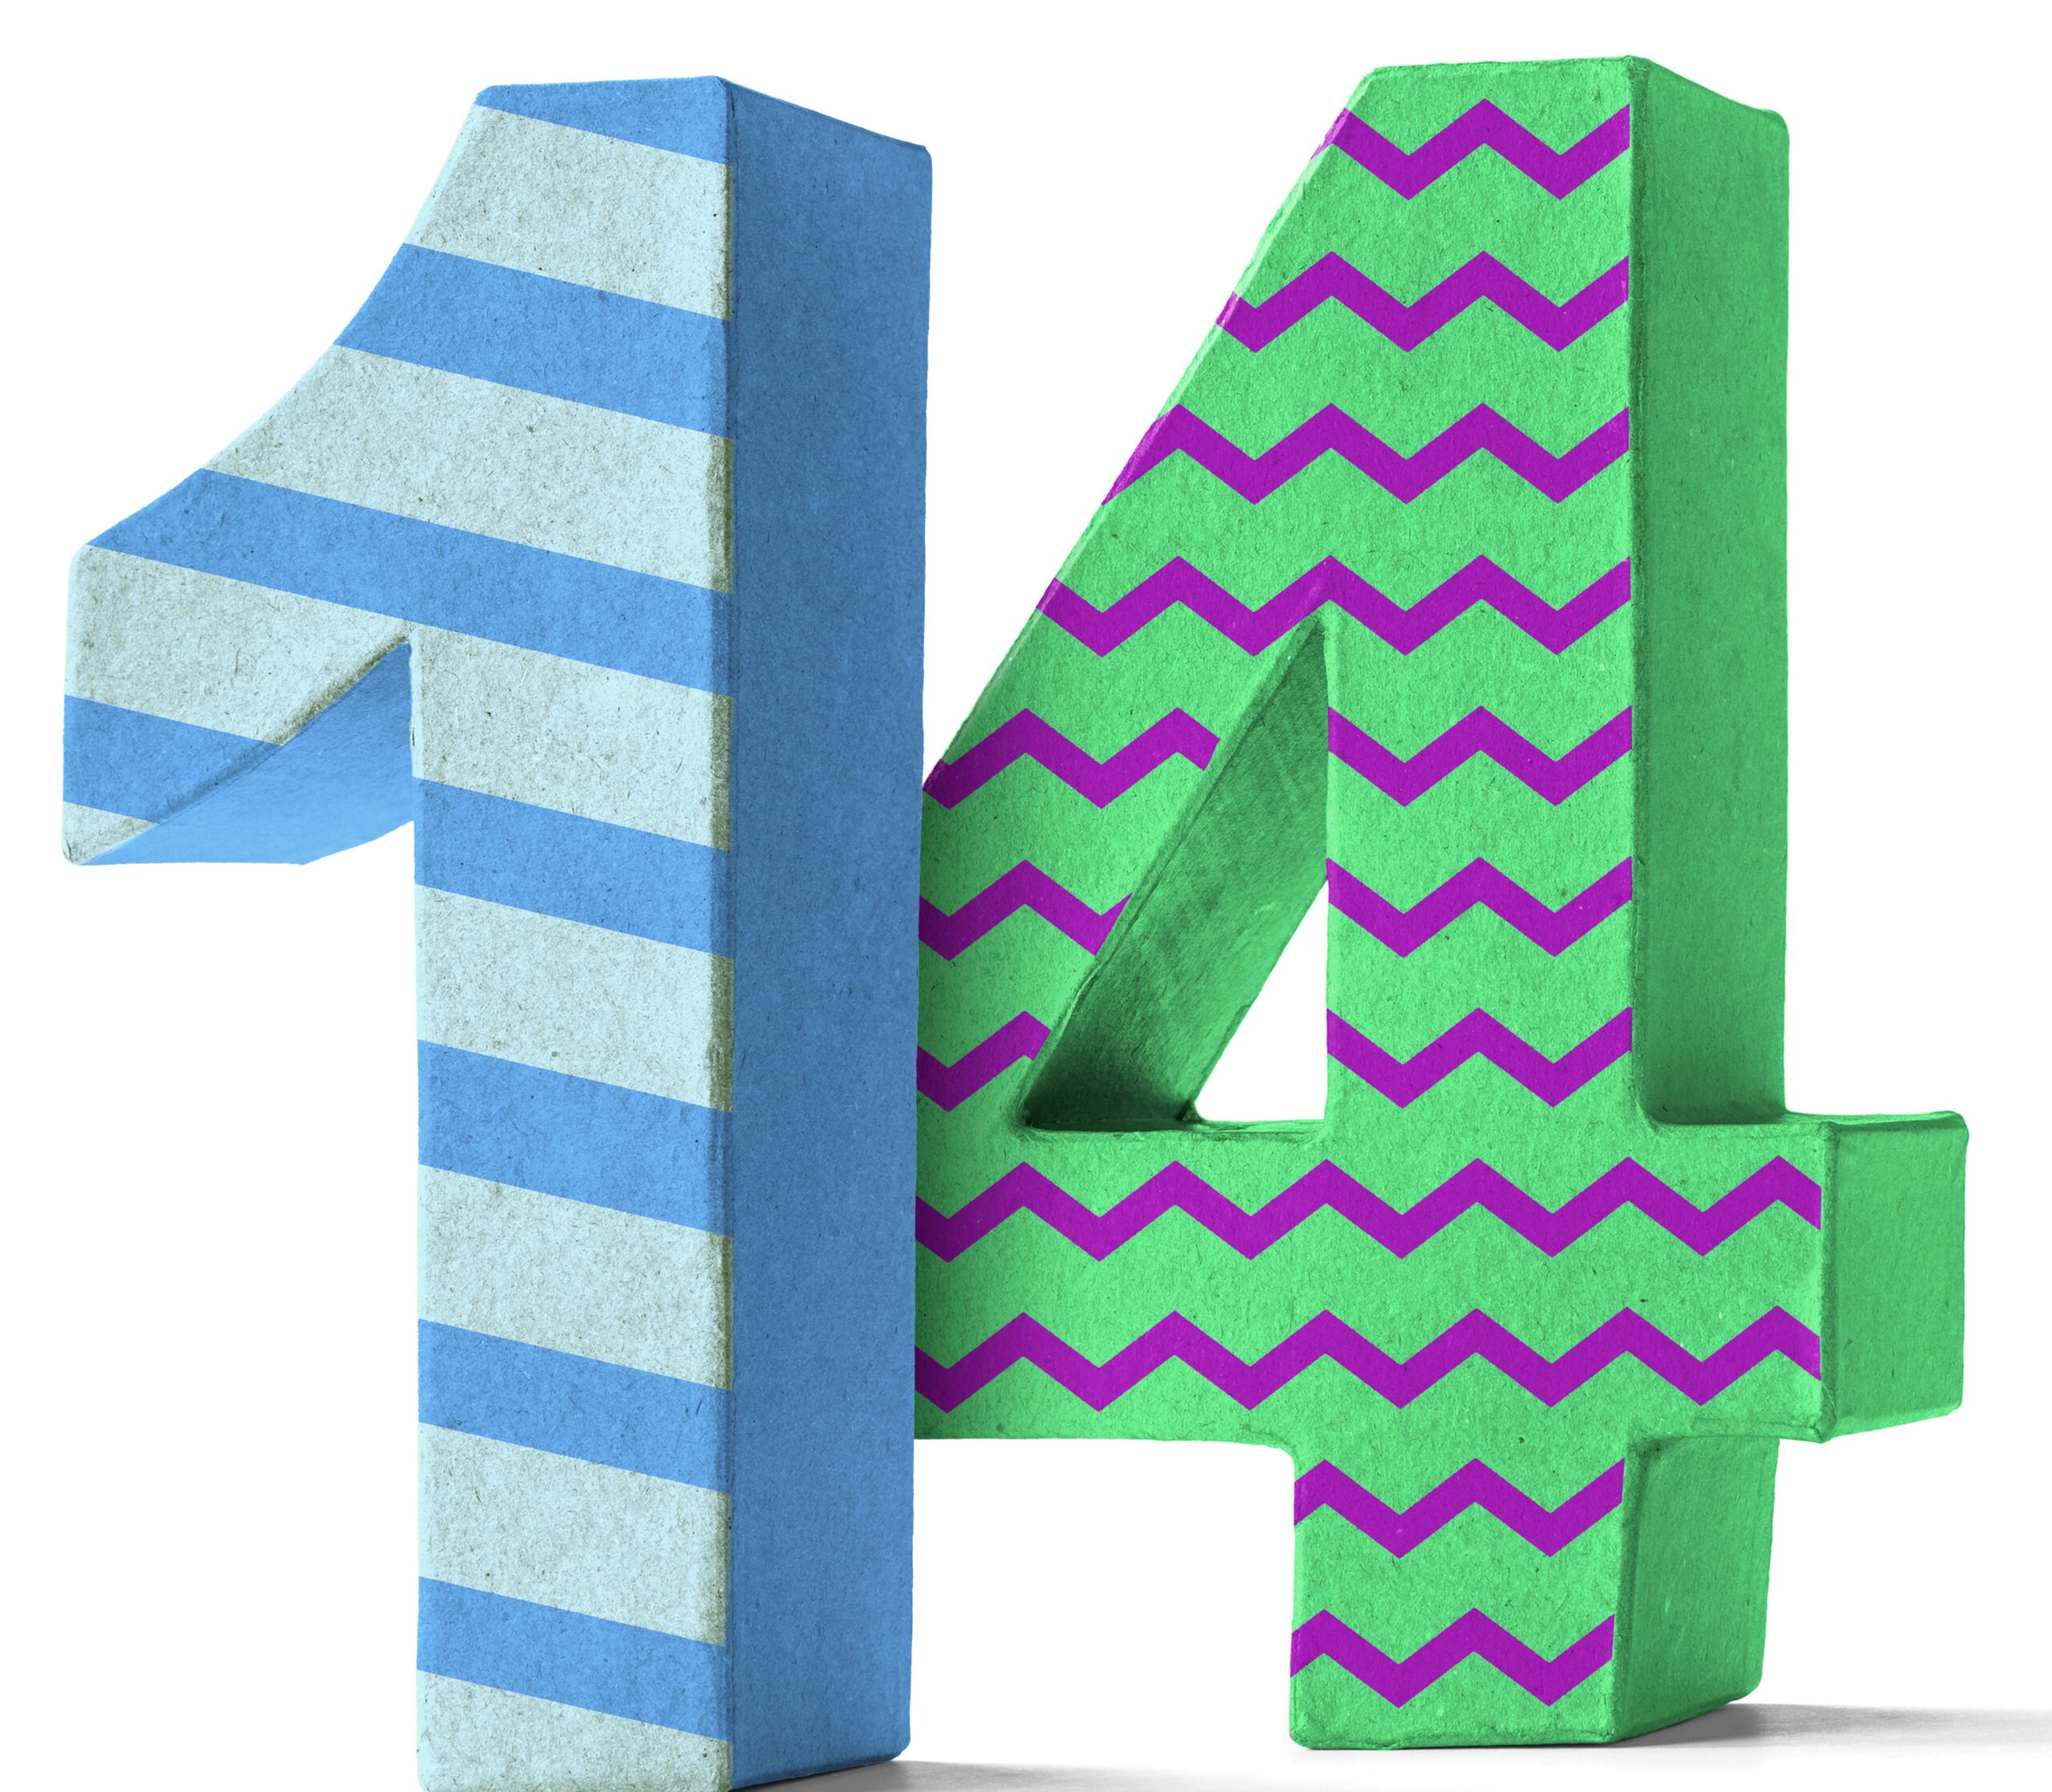 14 with blue one and green four